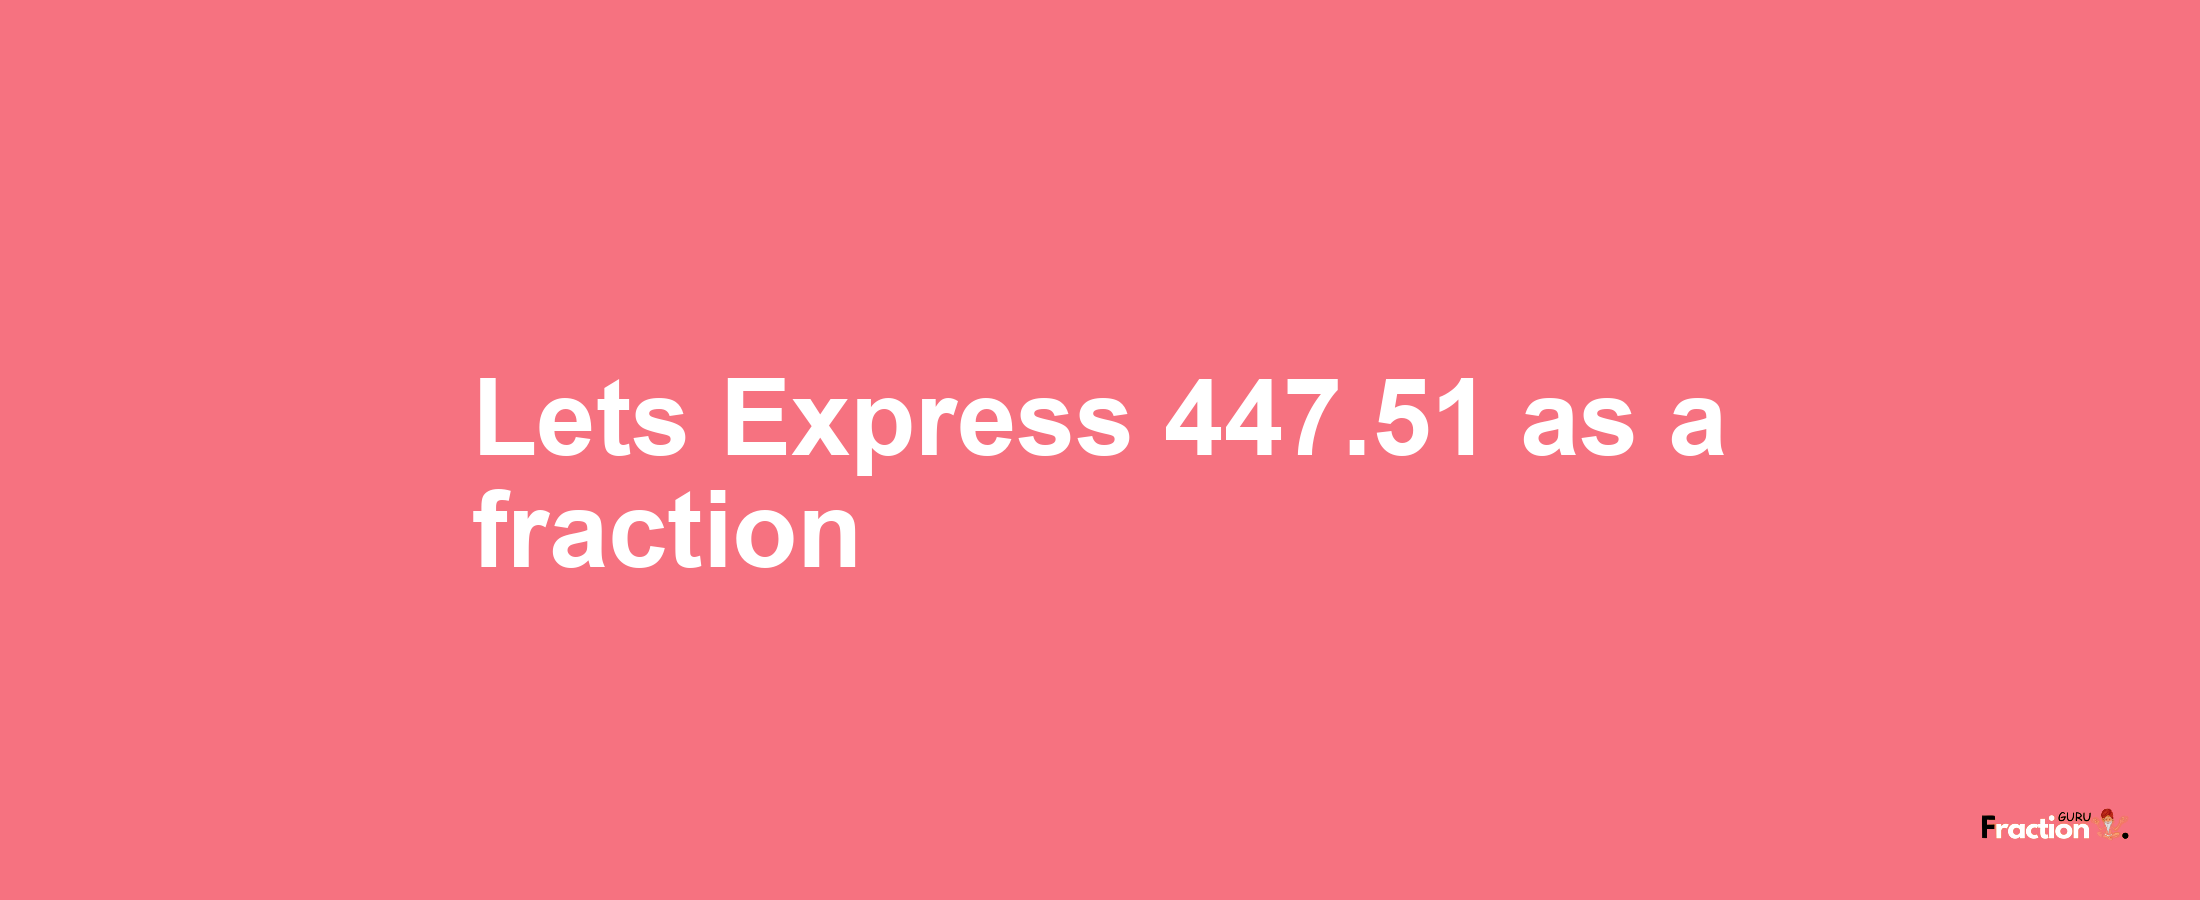 Lets Express 447.51 as afraction